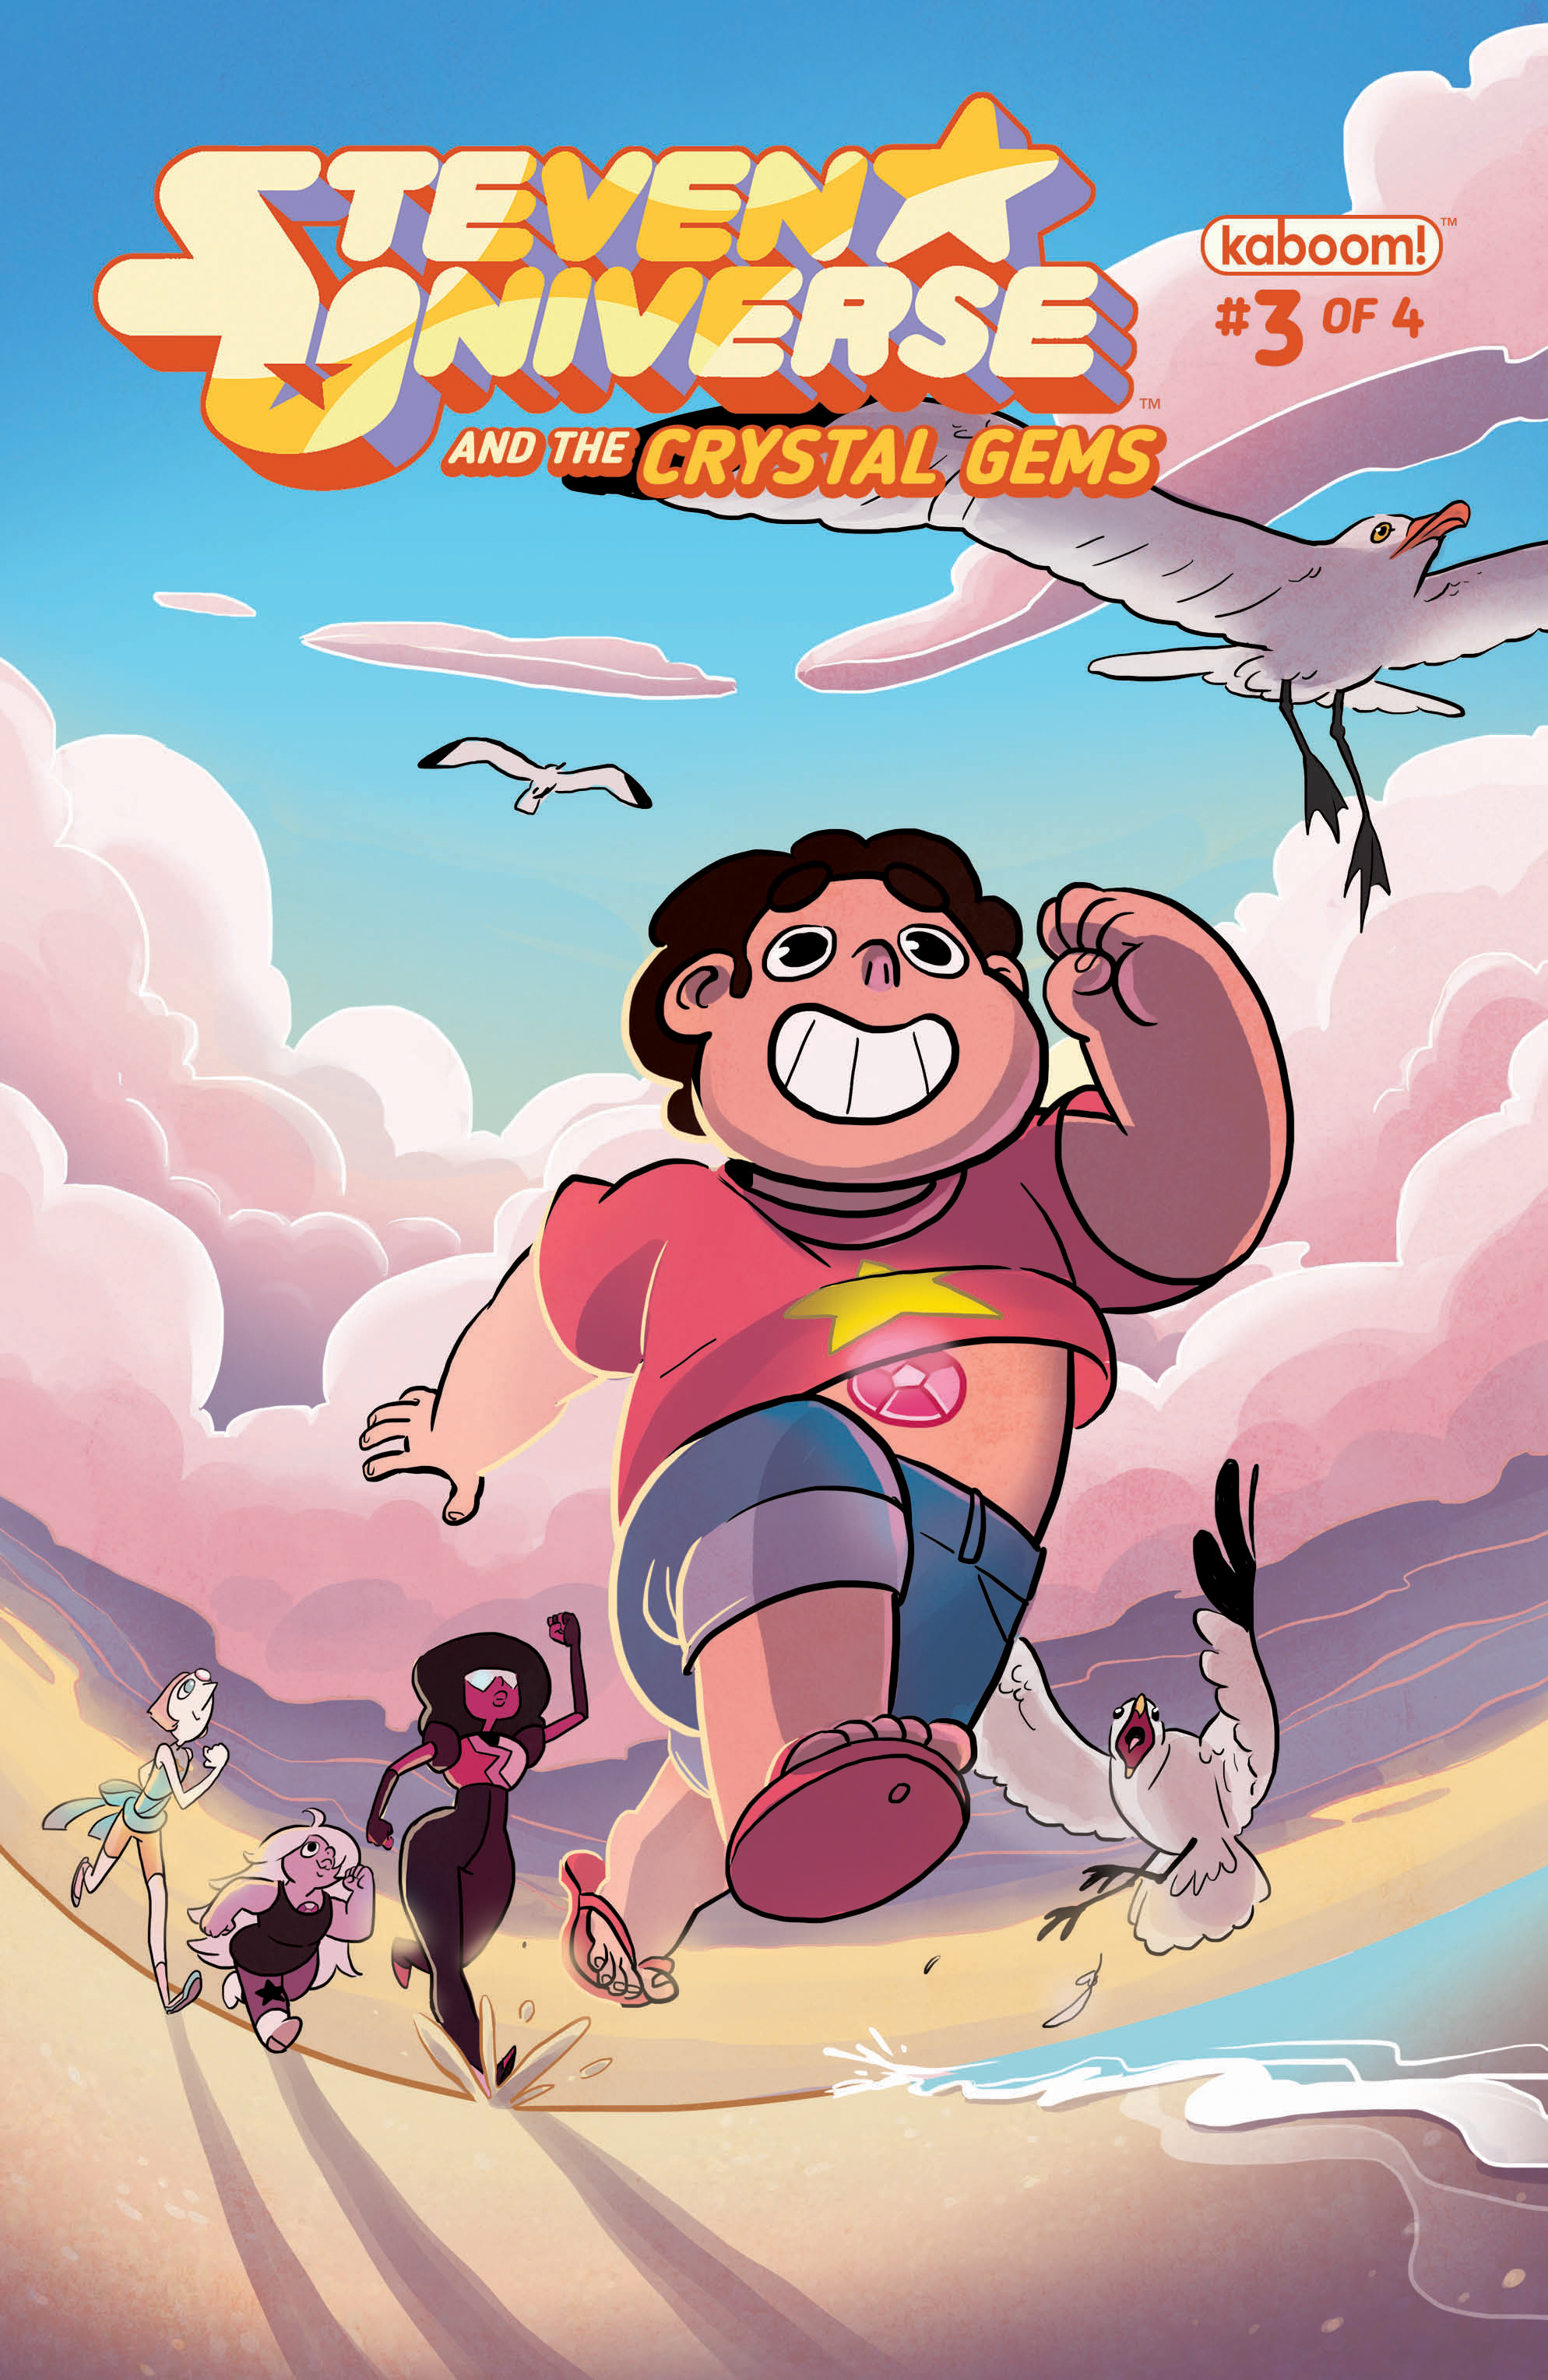 Issue 3 Steven Universe And The Crystal Gems Steven